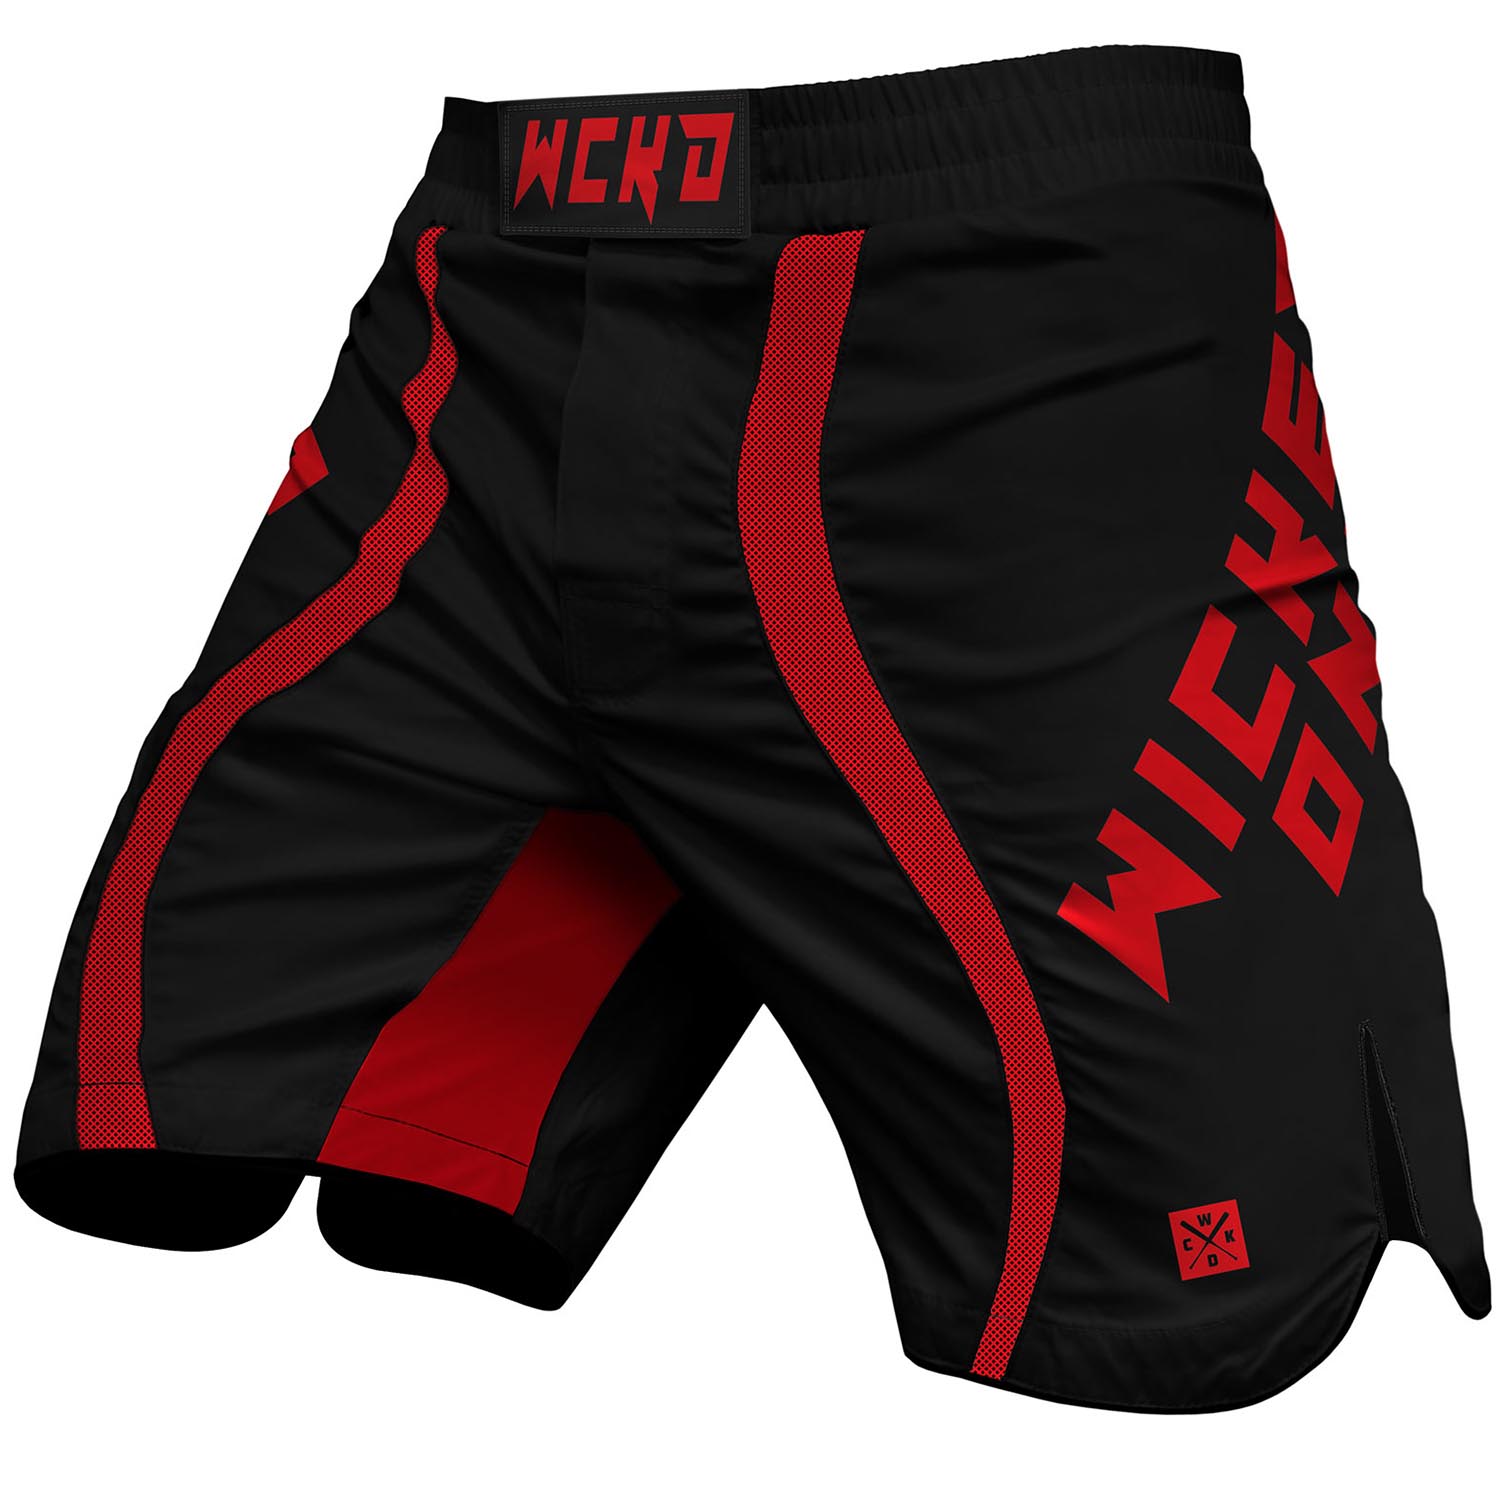 Wicked One MMA Fight Shorts, Brawl, black-red